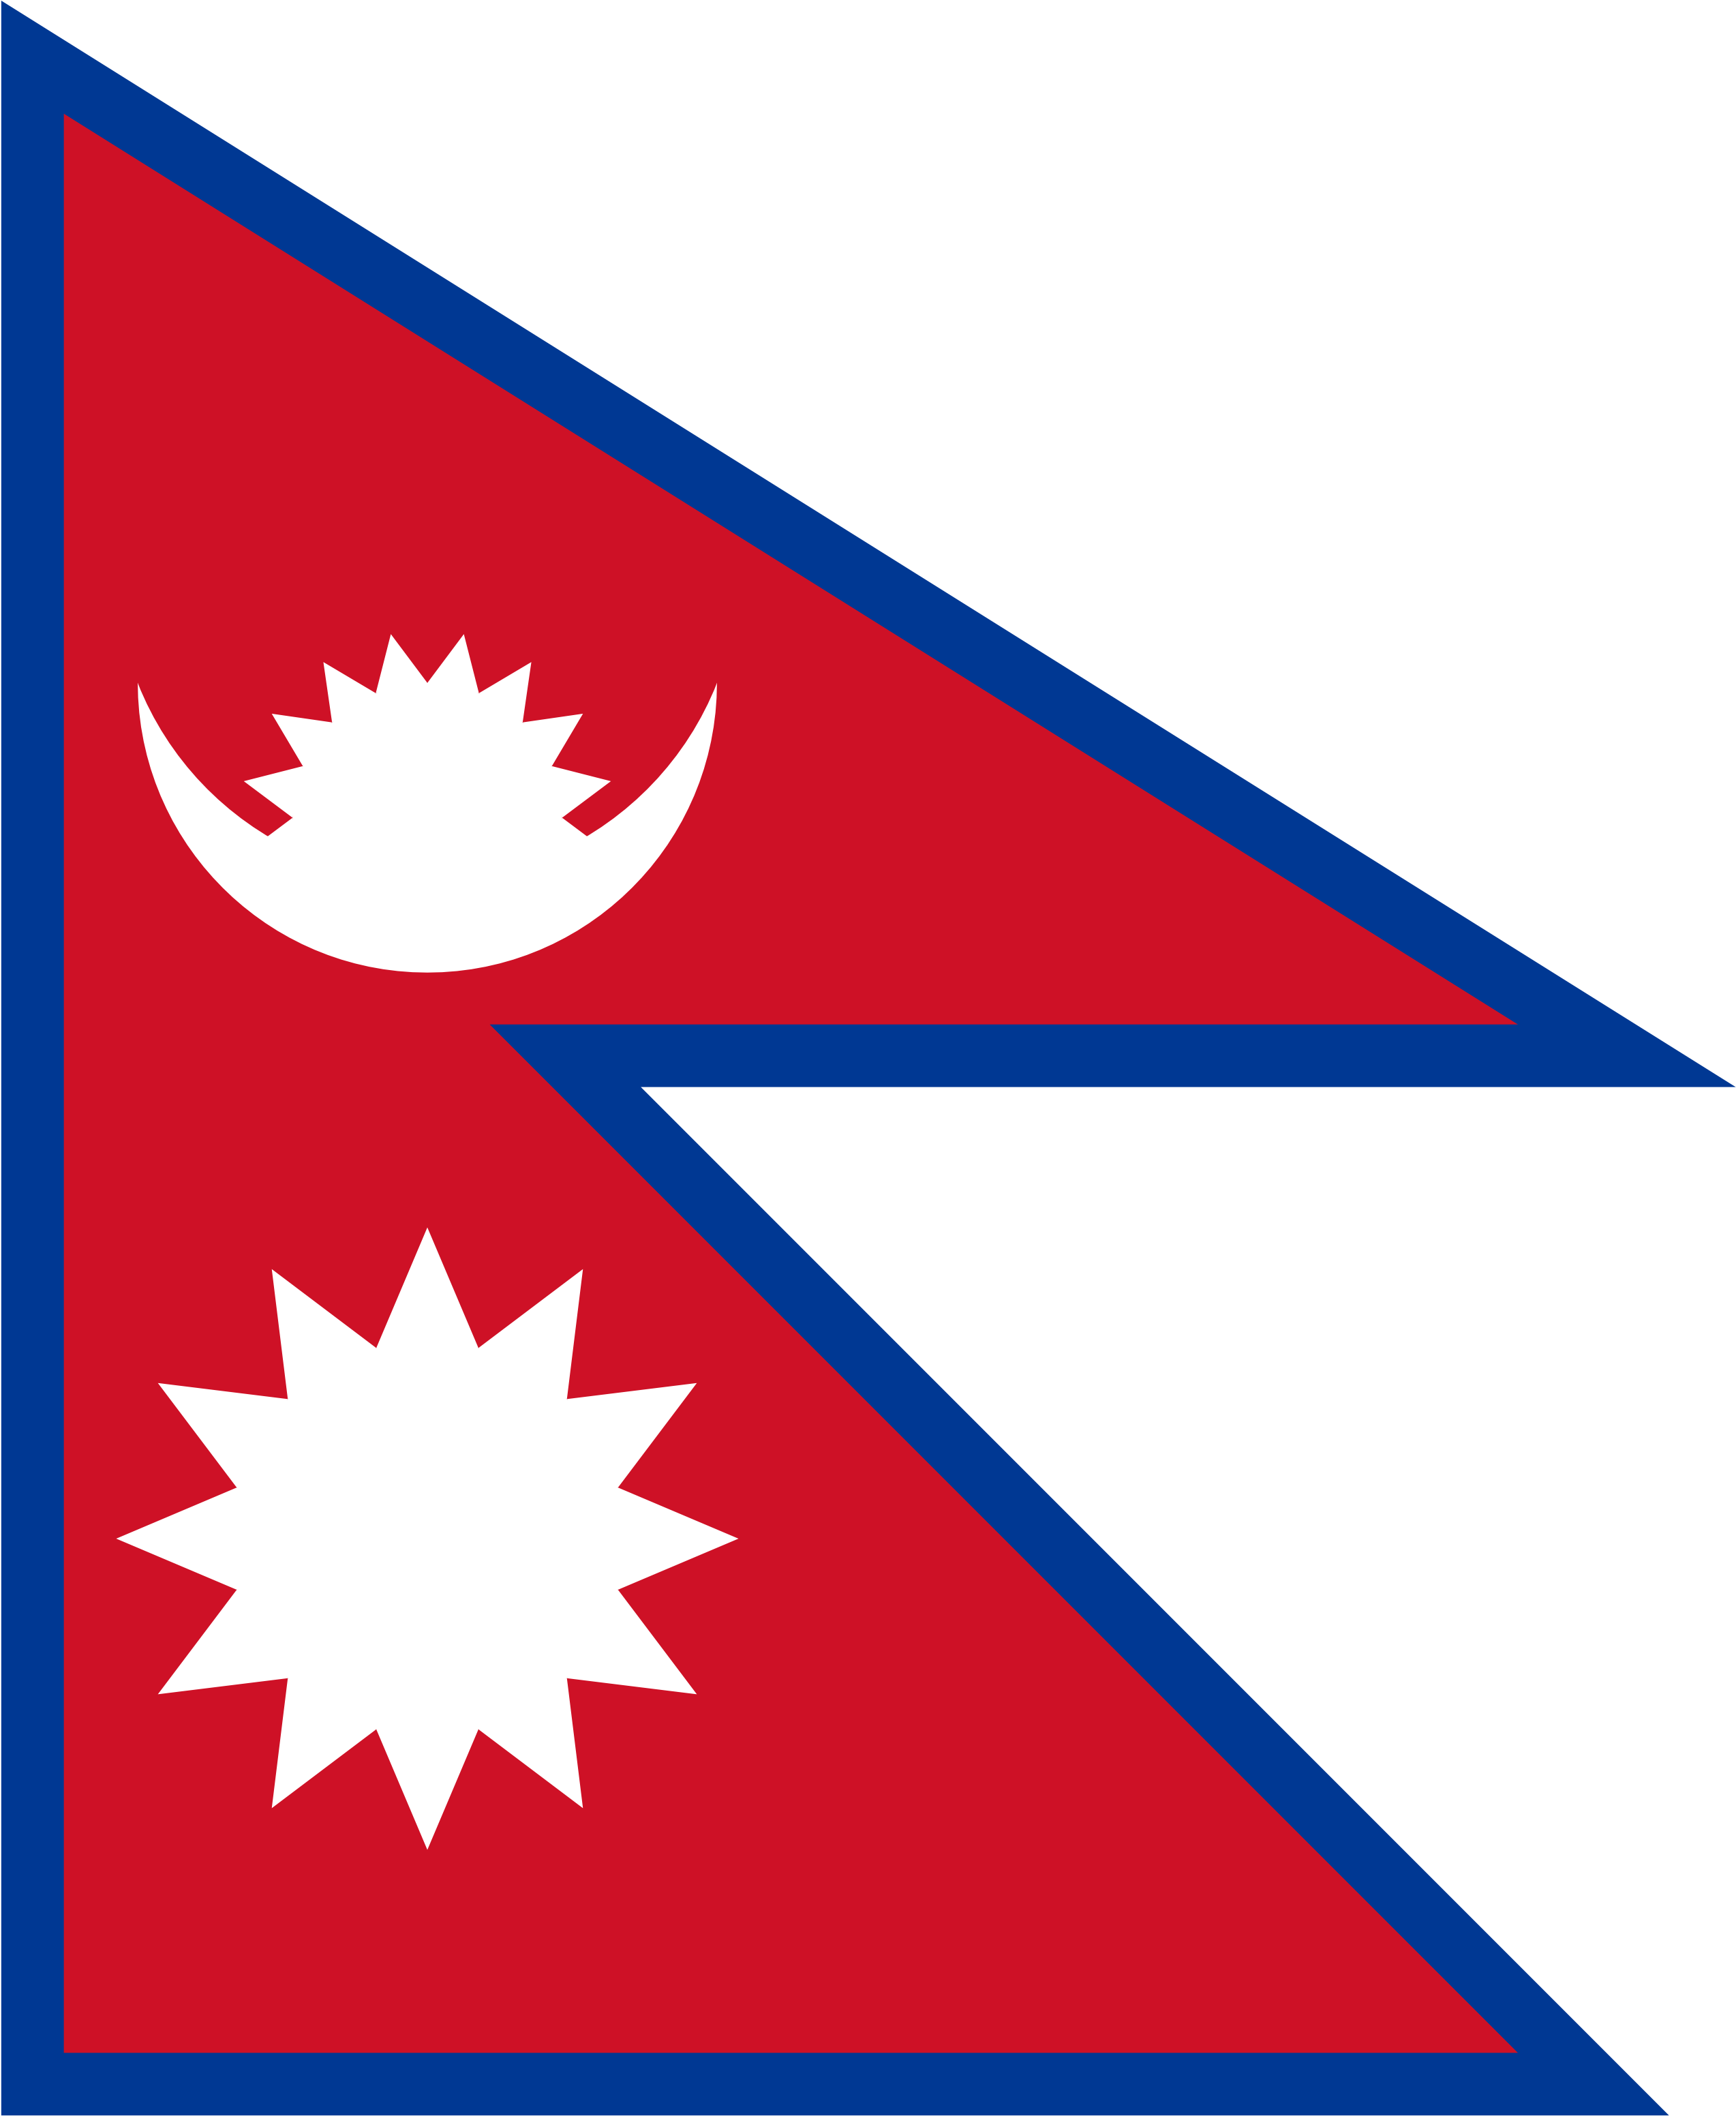 Flag Of Nepal, The Unique One In The Whole World - Cricket Association Of Nepal (2560x3129)